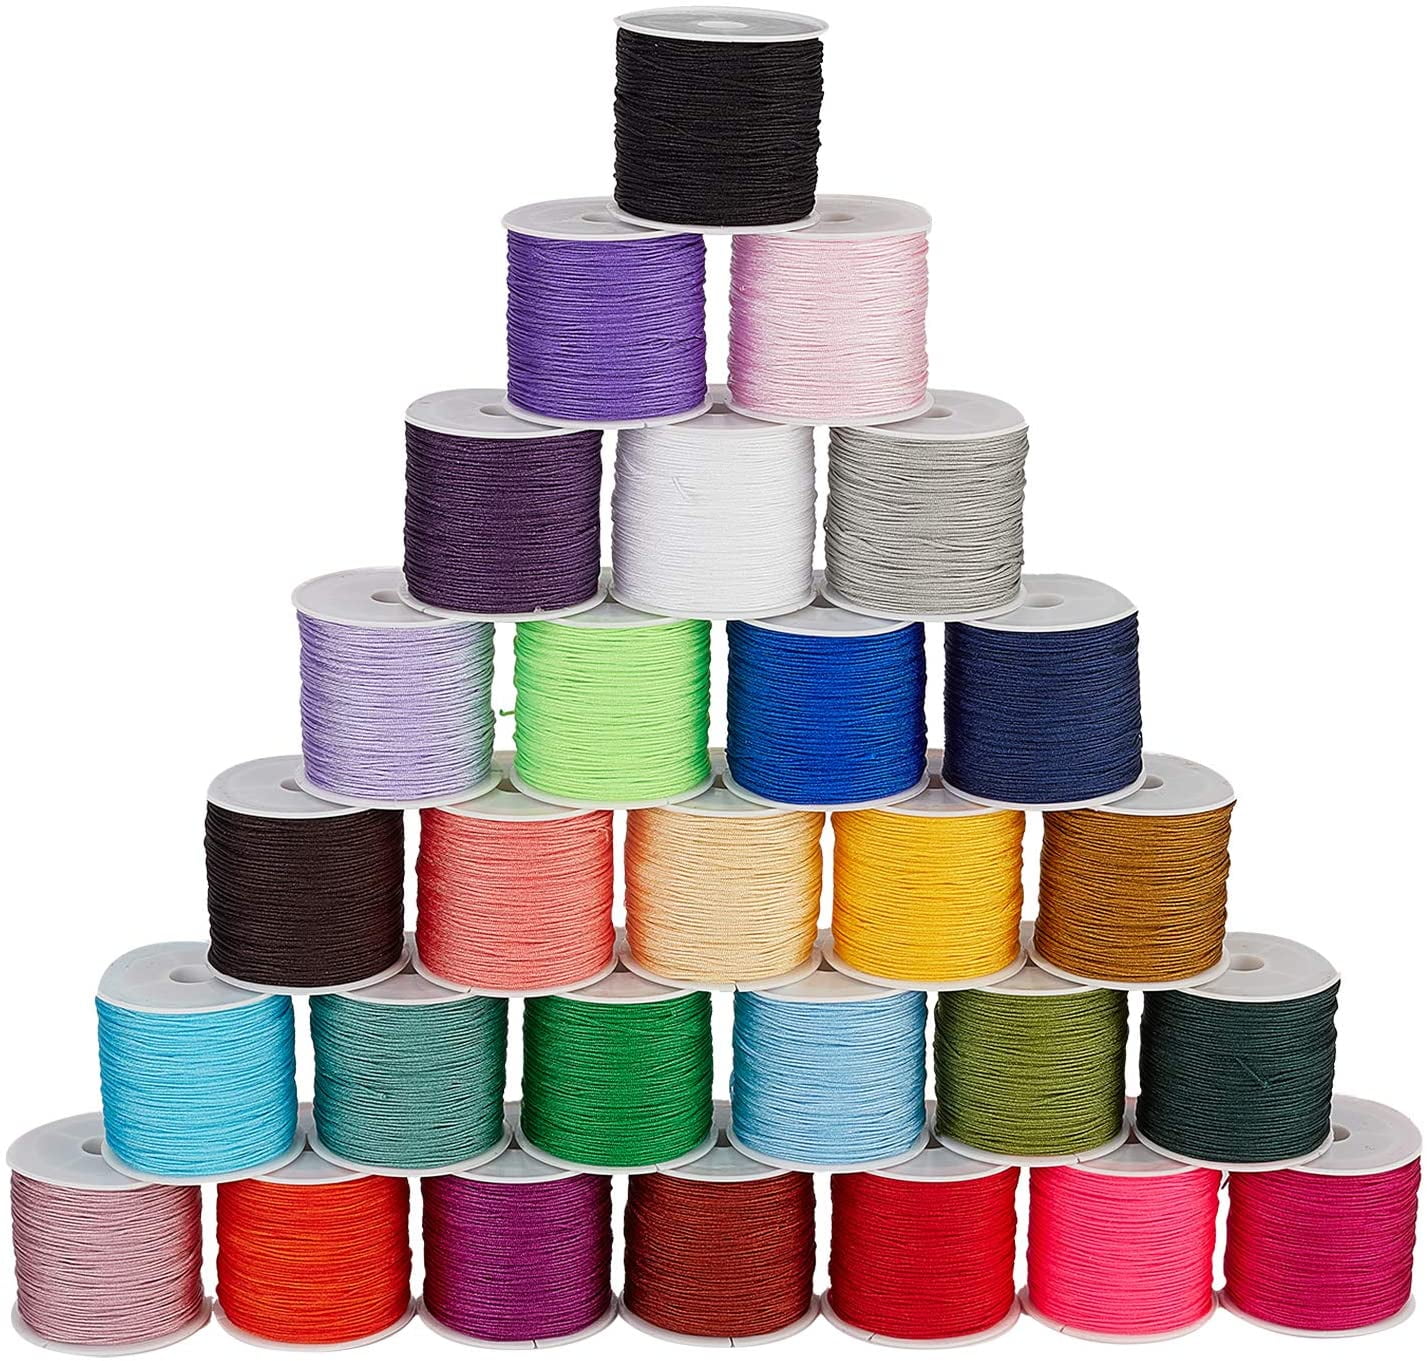 Pandahall Elite 20 Color Satin Rattail Cord String 2mm Nylon Satin Silk Cord  for Necklace Bracelet Beading Cord for Chinese Knot, Macramé, Trim, Jewelry  Making, 200 Yards Totally 